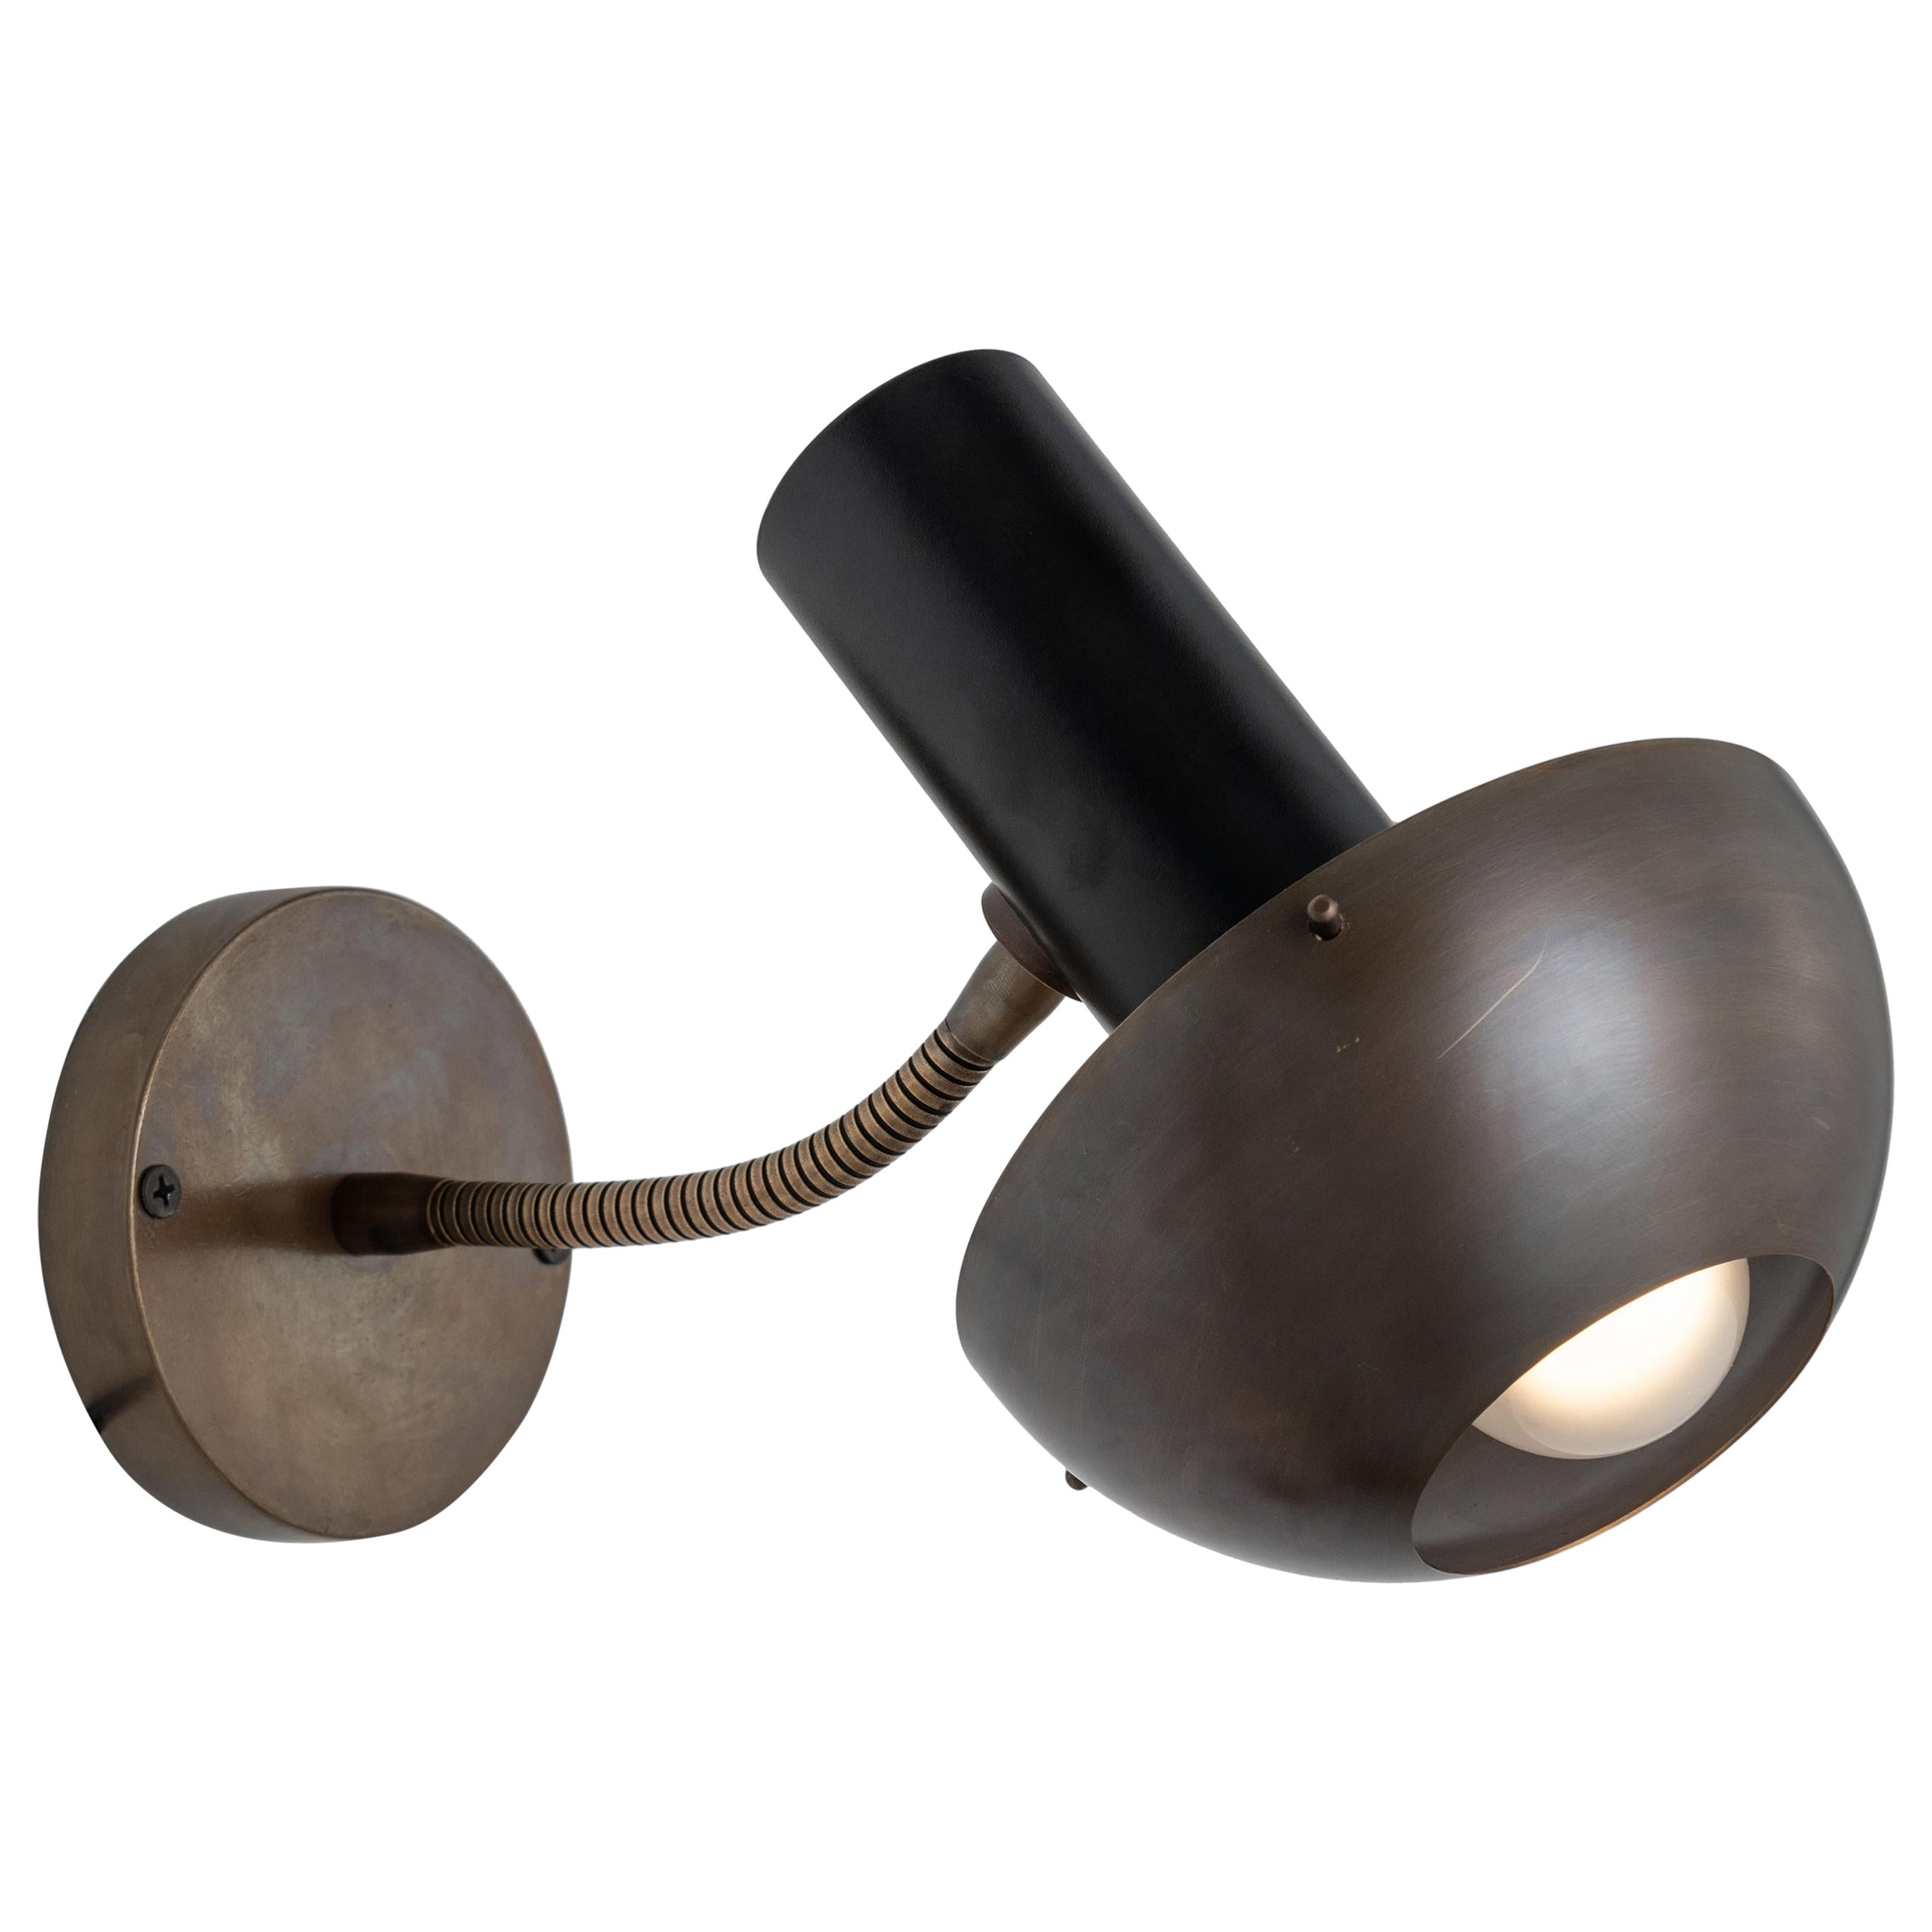 Brass and Black Metal Wall Sconce with Adjustable Arm, Made in Italy For Sale